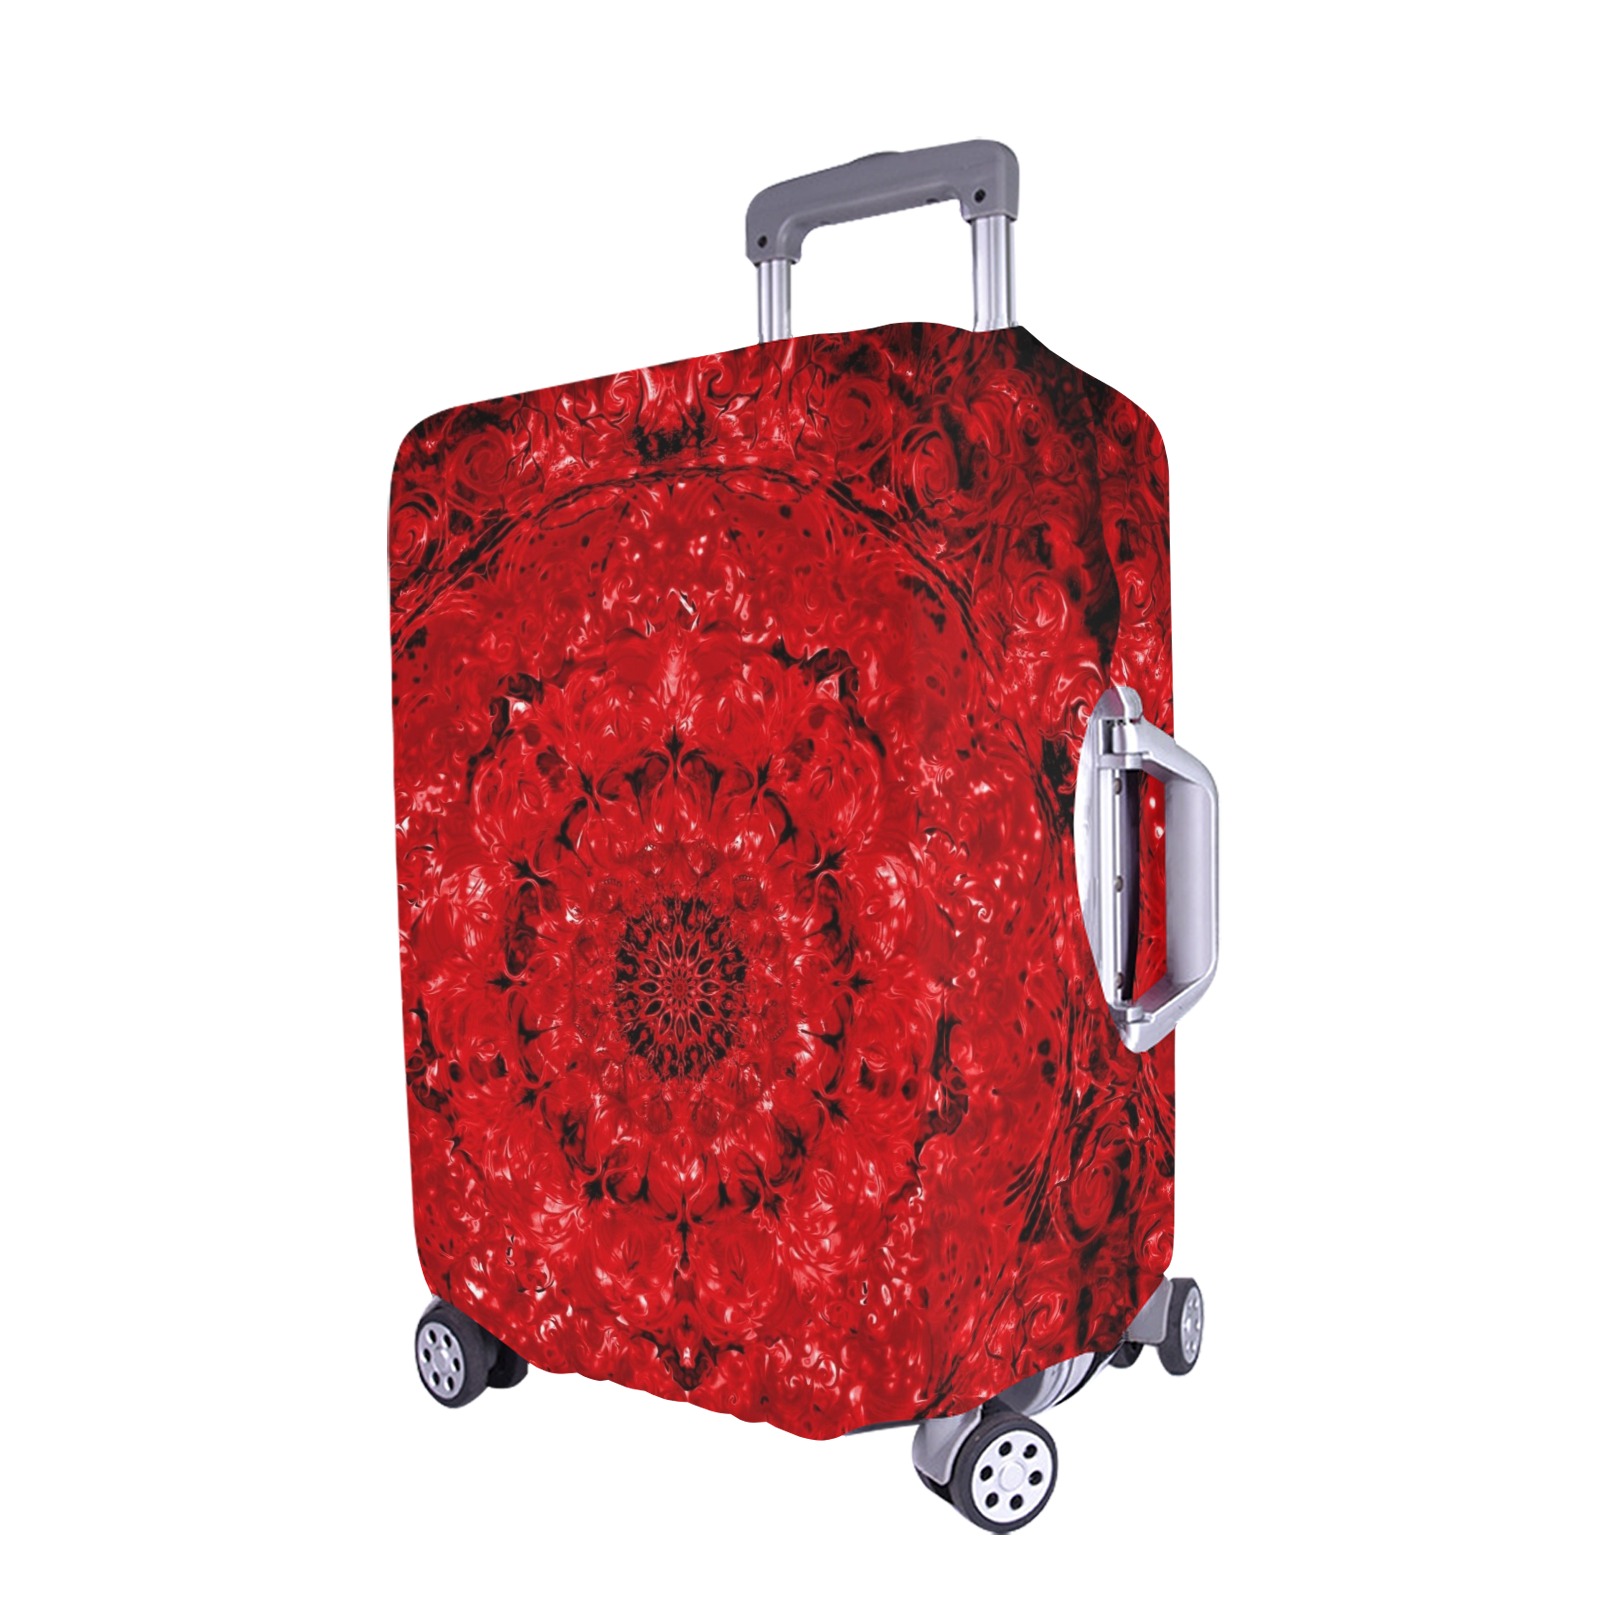 light and water 2-17 Luggage Cover/Extra Large 28"-30"